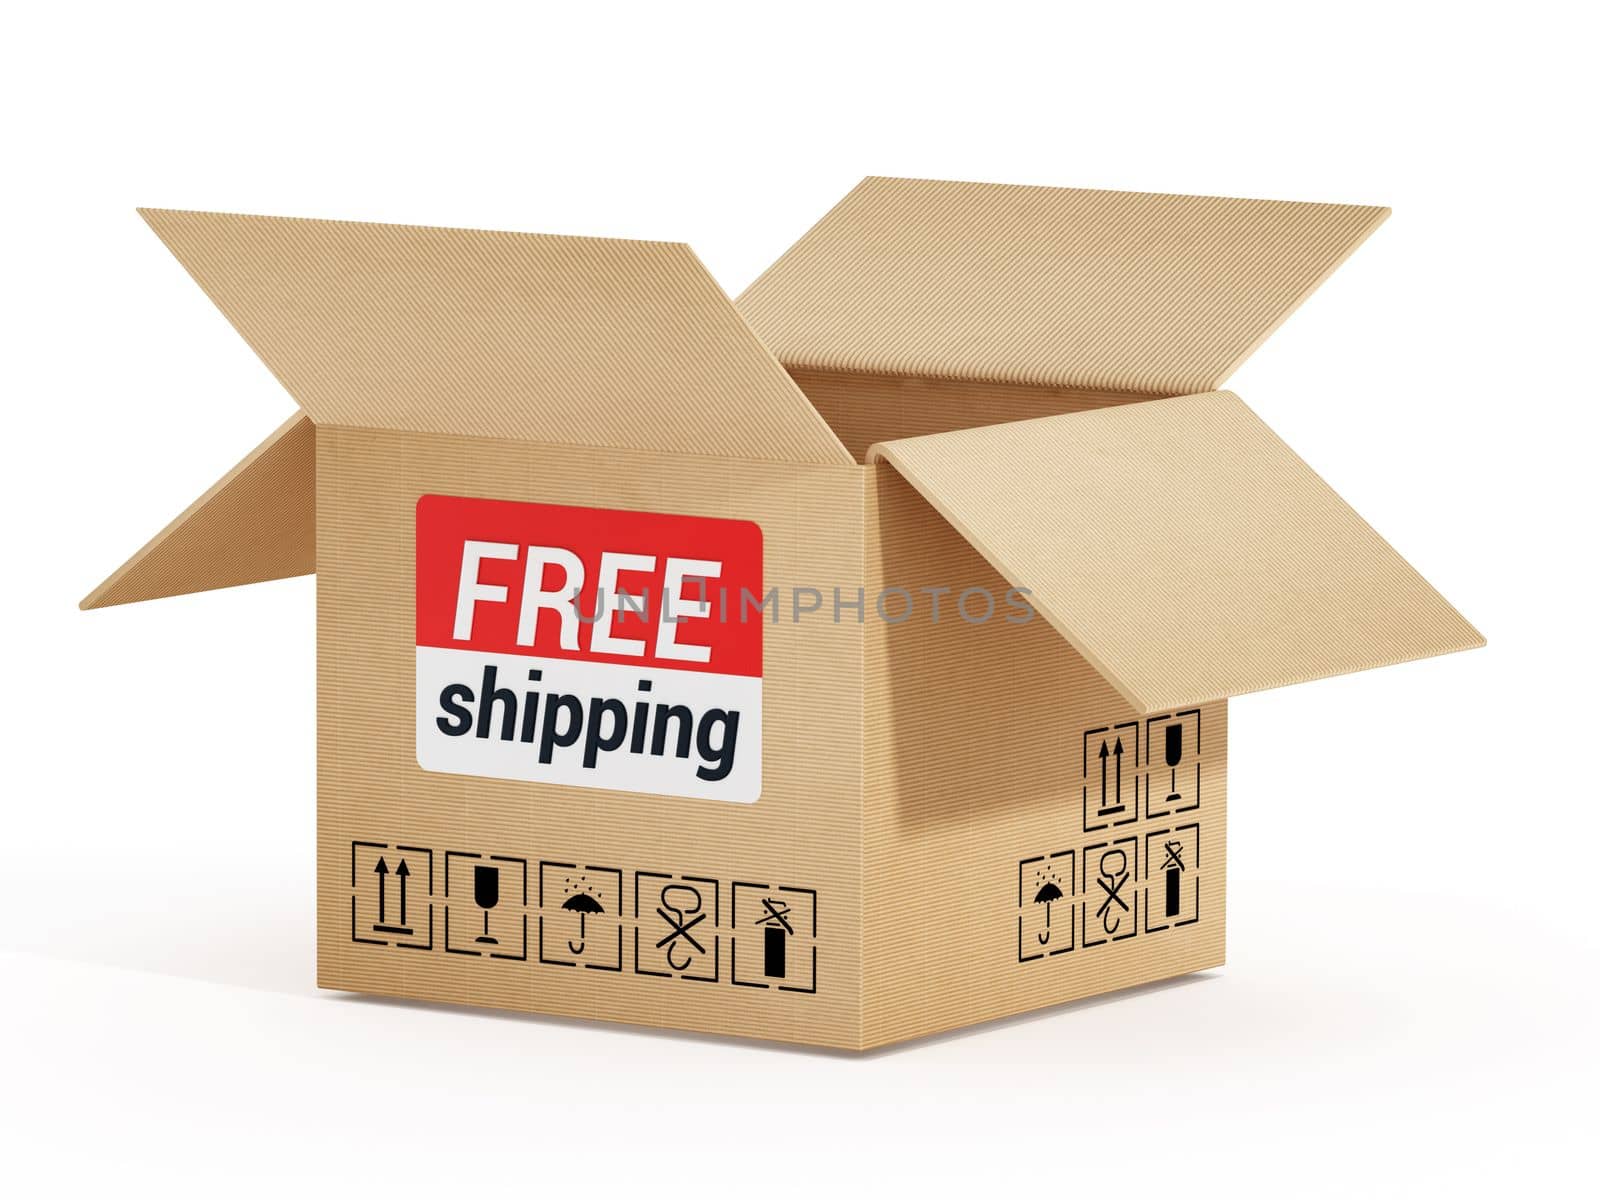 Cardboard box with free shipping text isolated on white background. 3D illustration by Simsek